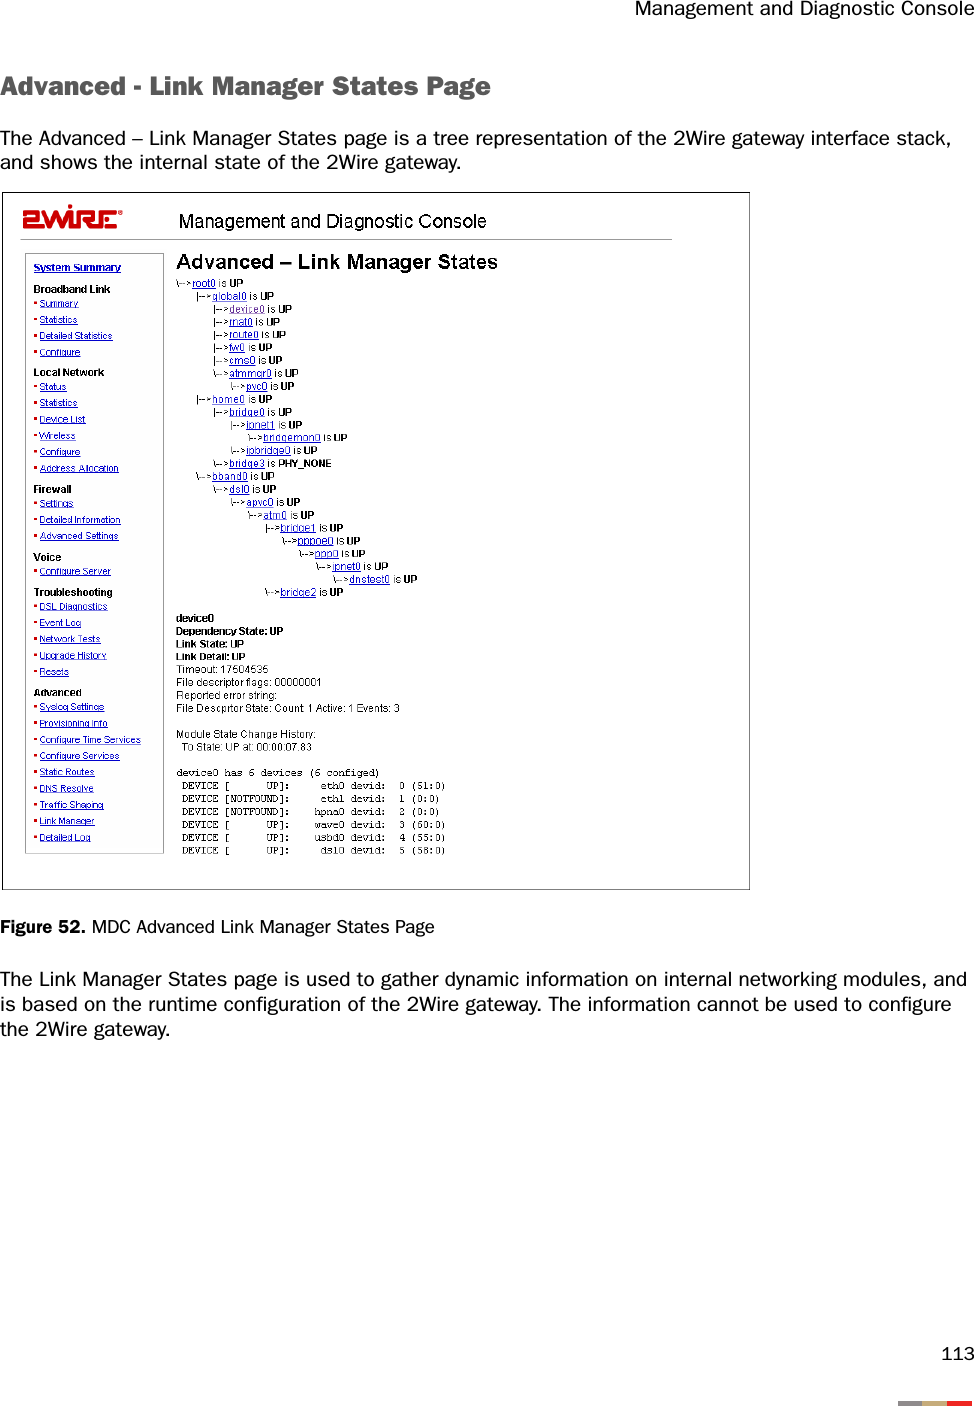 Management and Diagnostic Console113Advanced - Link Manager States PageThe Advanced – Link Manager States page is a tree representation of the 2Wire gateway interface stack, and shows the internal state of the 2Wire gateway.Figure 52. MDC Advanced Link Manager States PageThe Link Manager States page is used to gather dynamic information on internal networking modules, and is based on the runtime configuration of the 2Wire gateway. The information cannot be used to configure the 2Wire gateway.